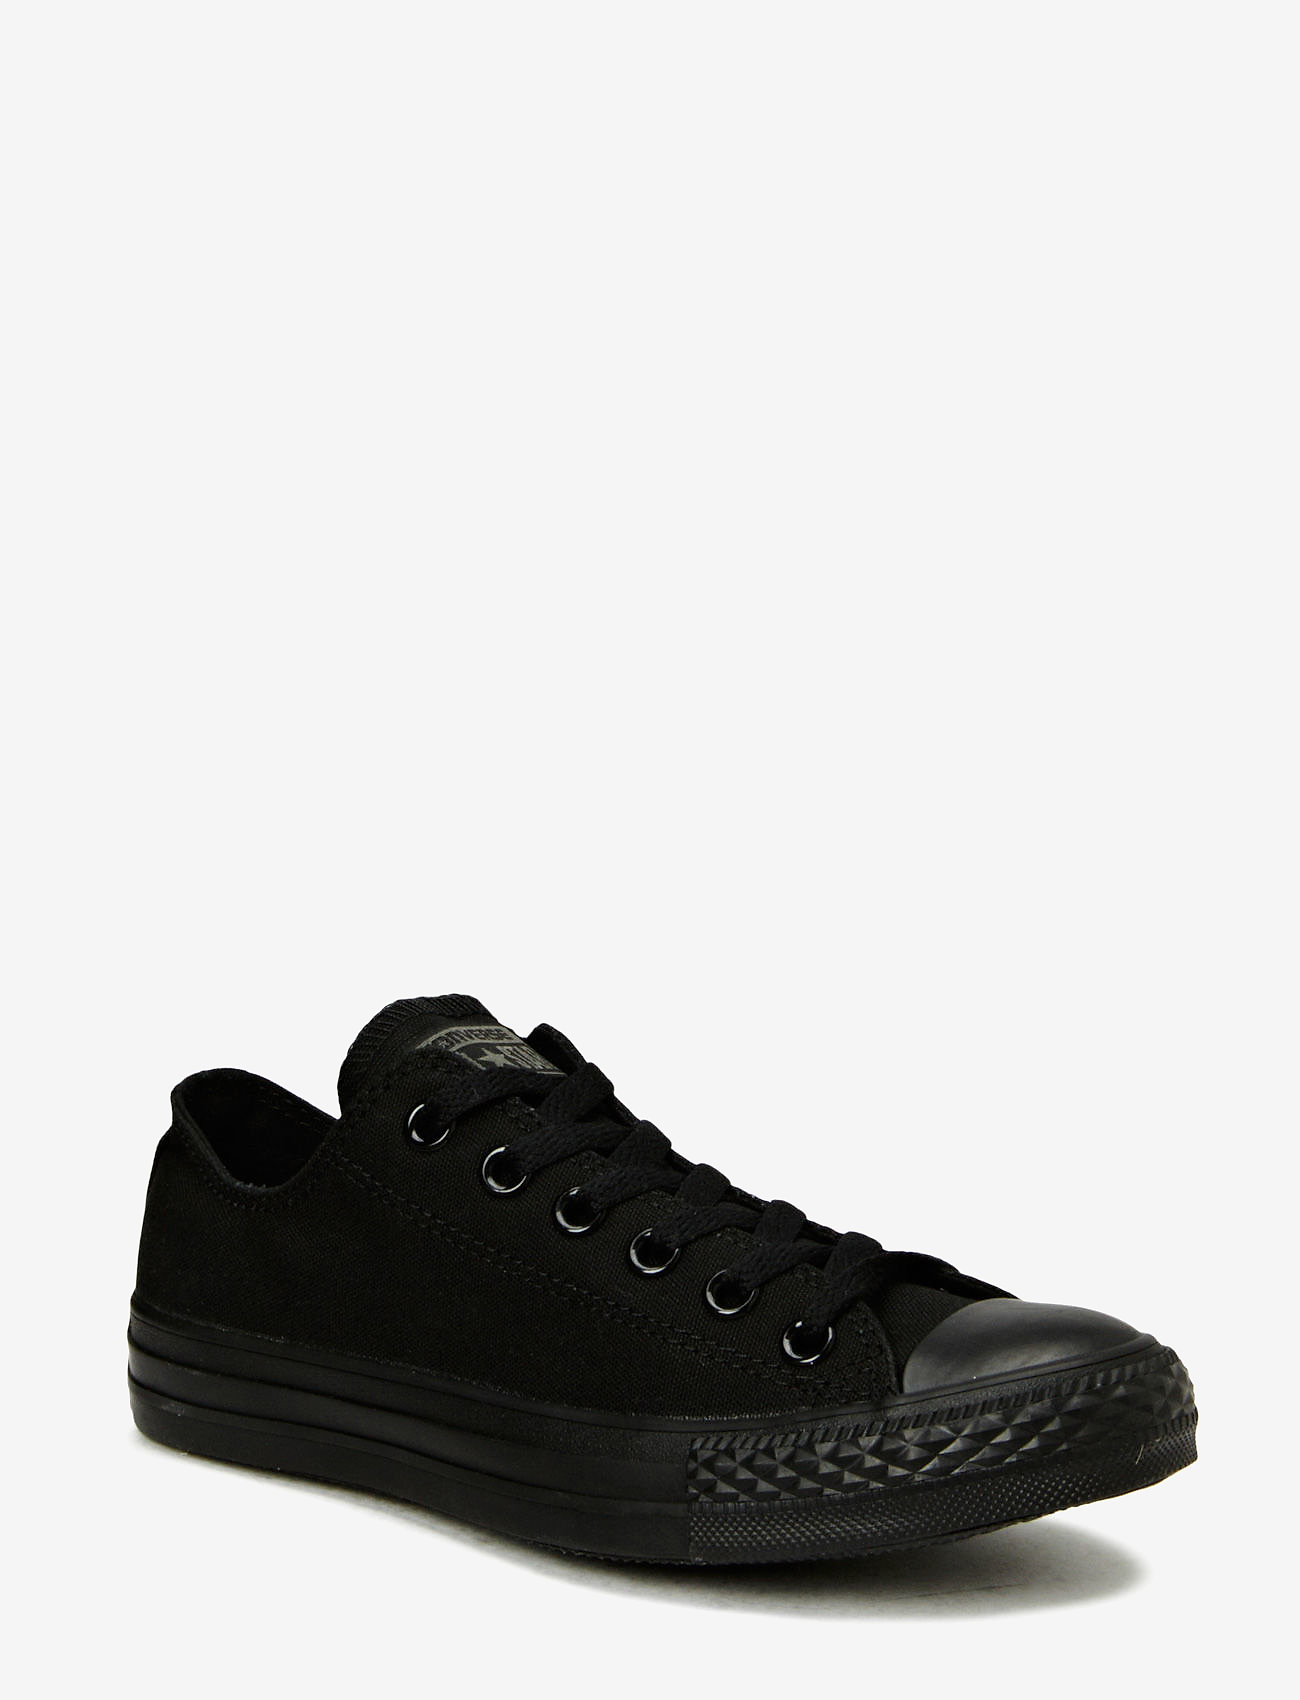 Converse Chuck Taylor All Star - Low top sneakers 